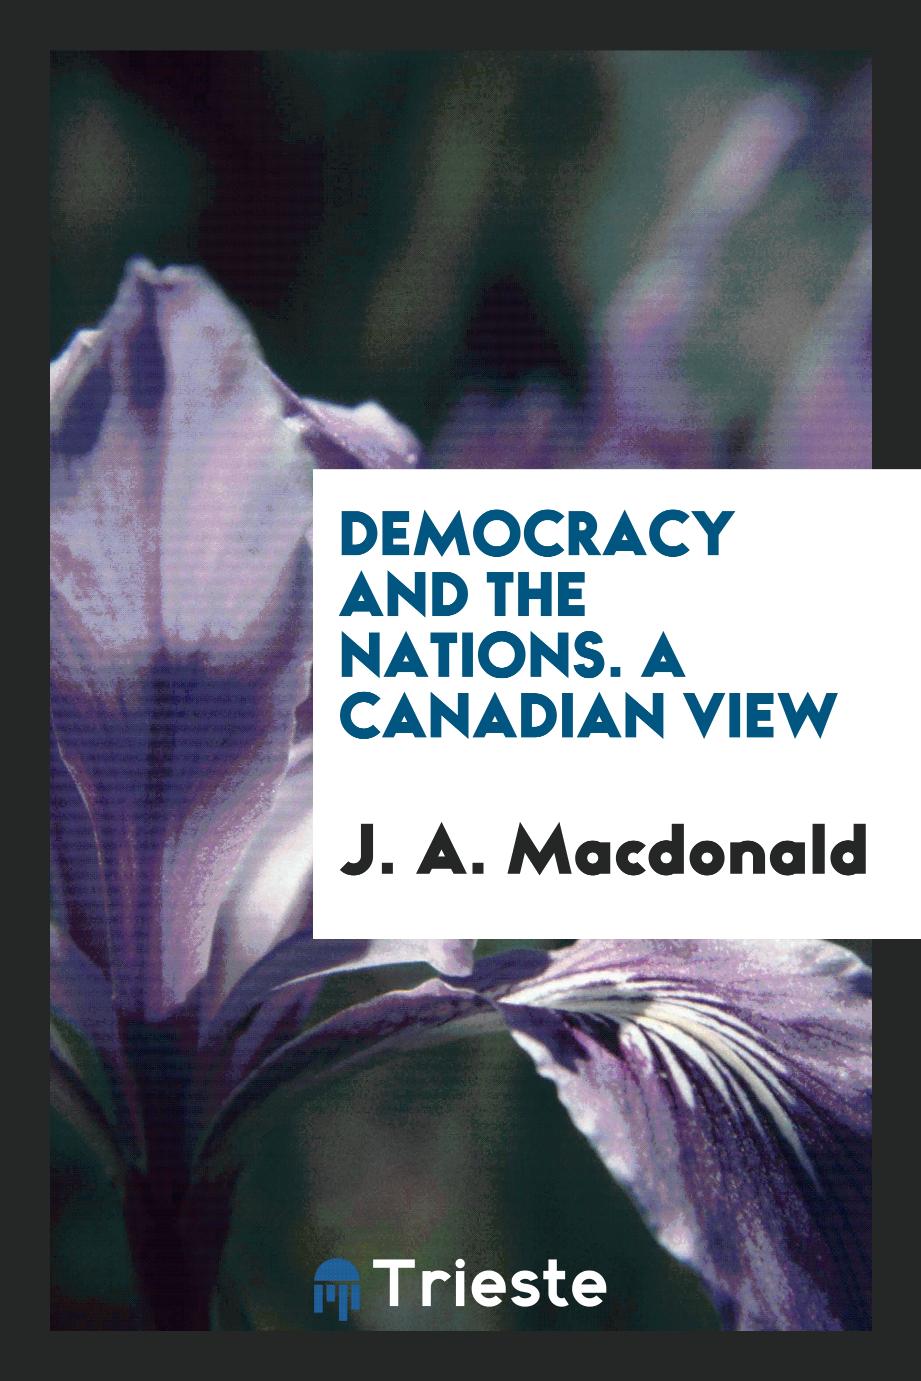 Democracy and the nations. A Canadian View